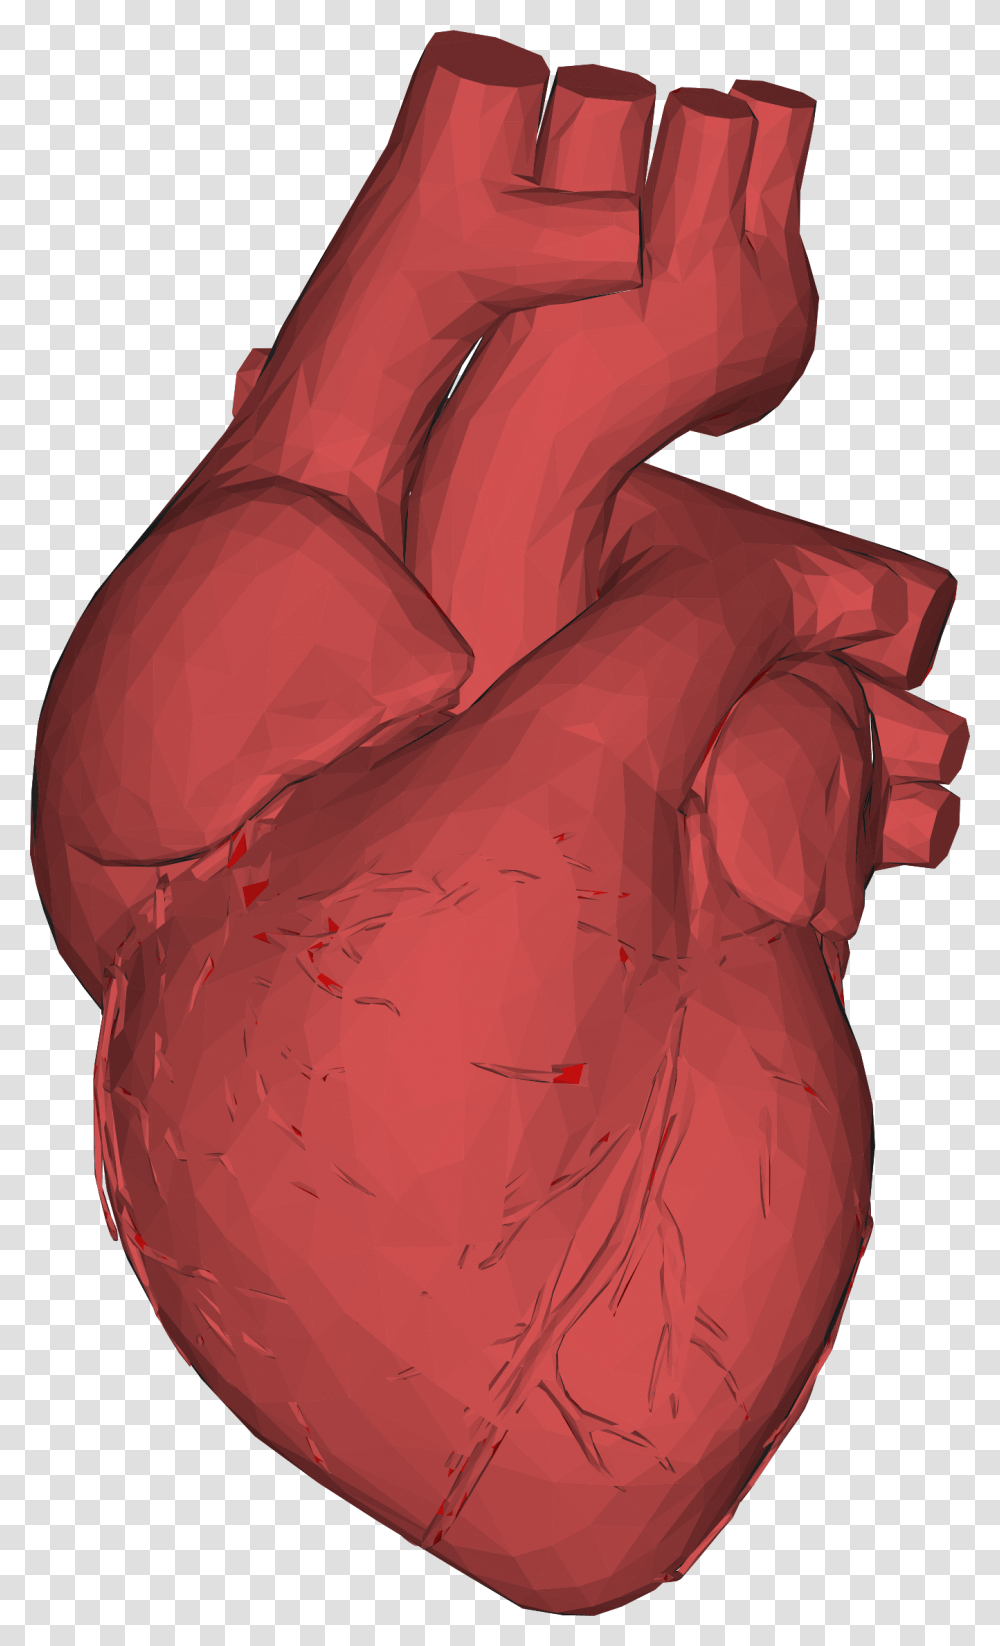 The Heart Of Matter Single Steps Learning Project Background Anatomical Heart, Hand, Wrist, Fist, Finger Transparent Png